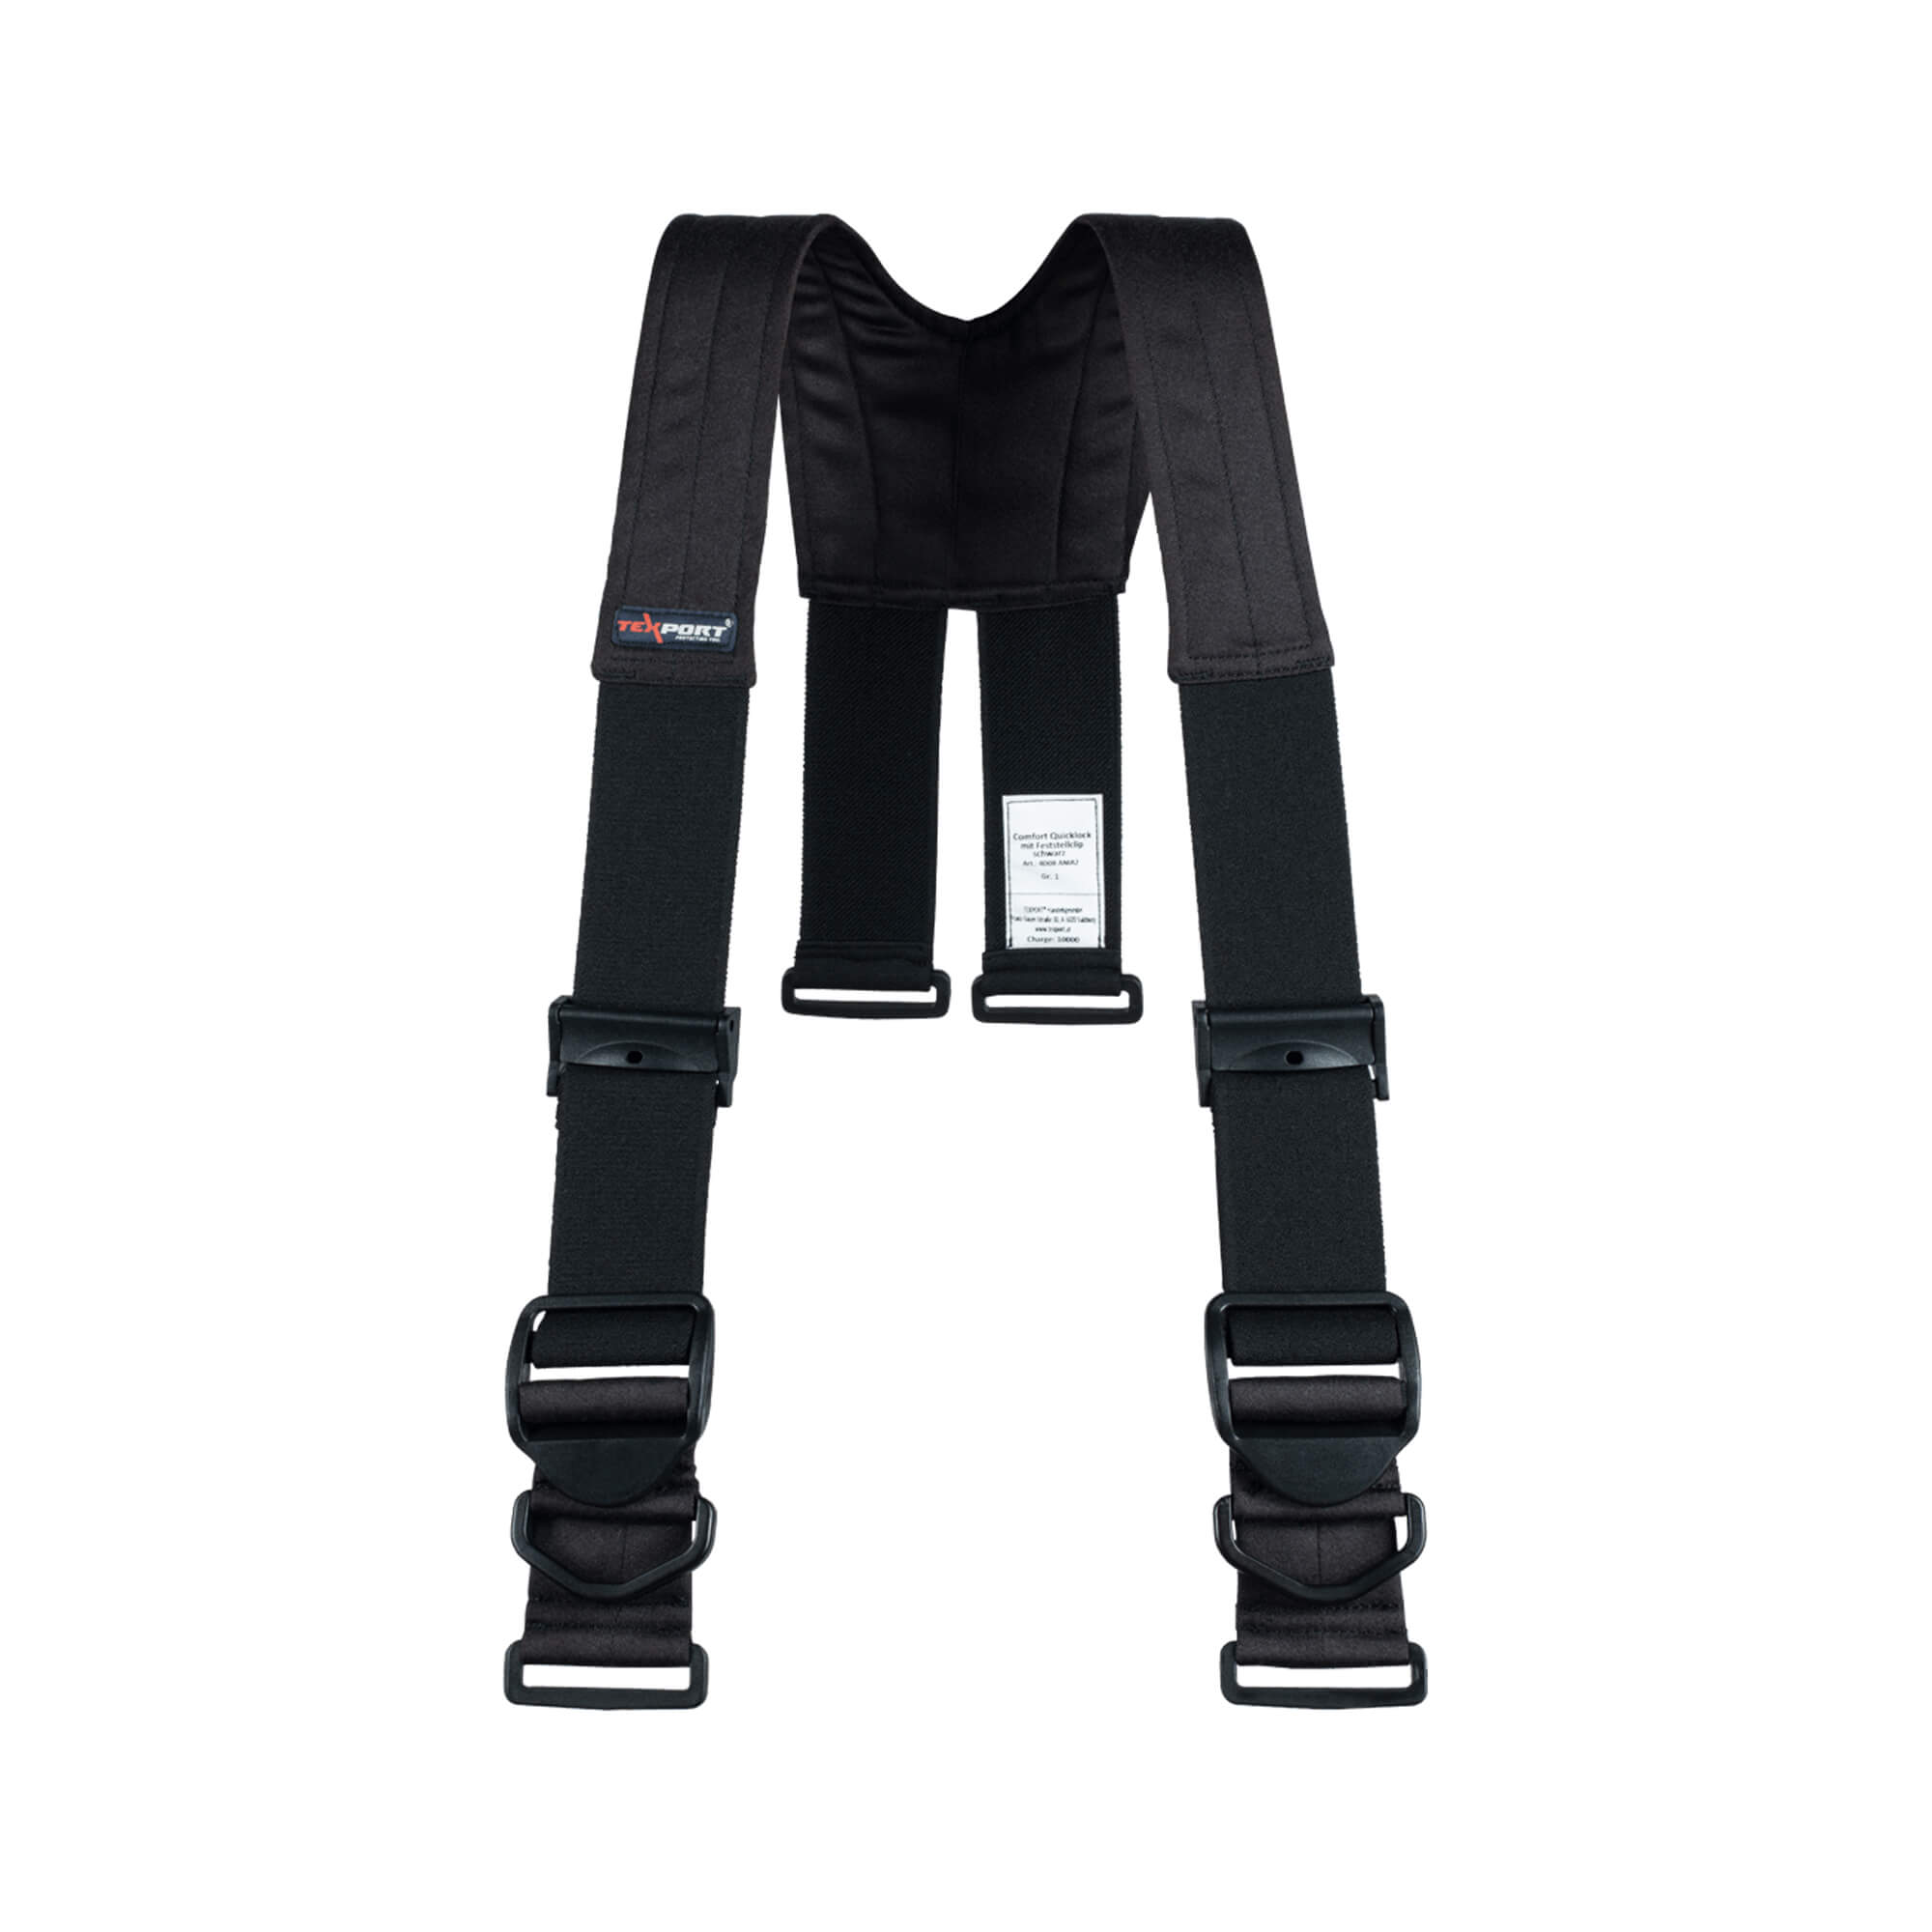 Suspenders for Fire Suit Trousers